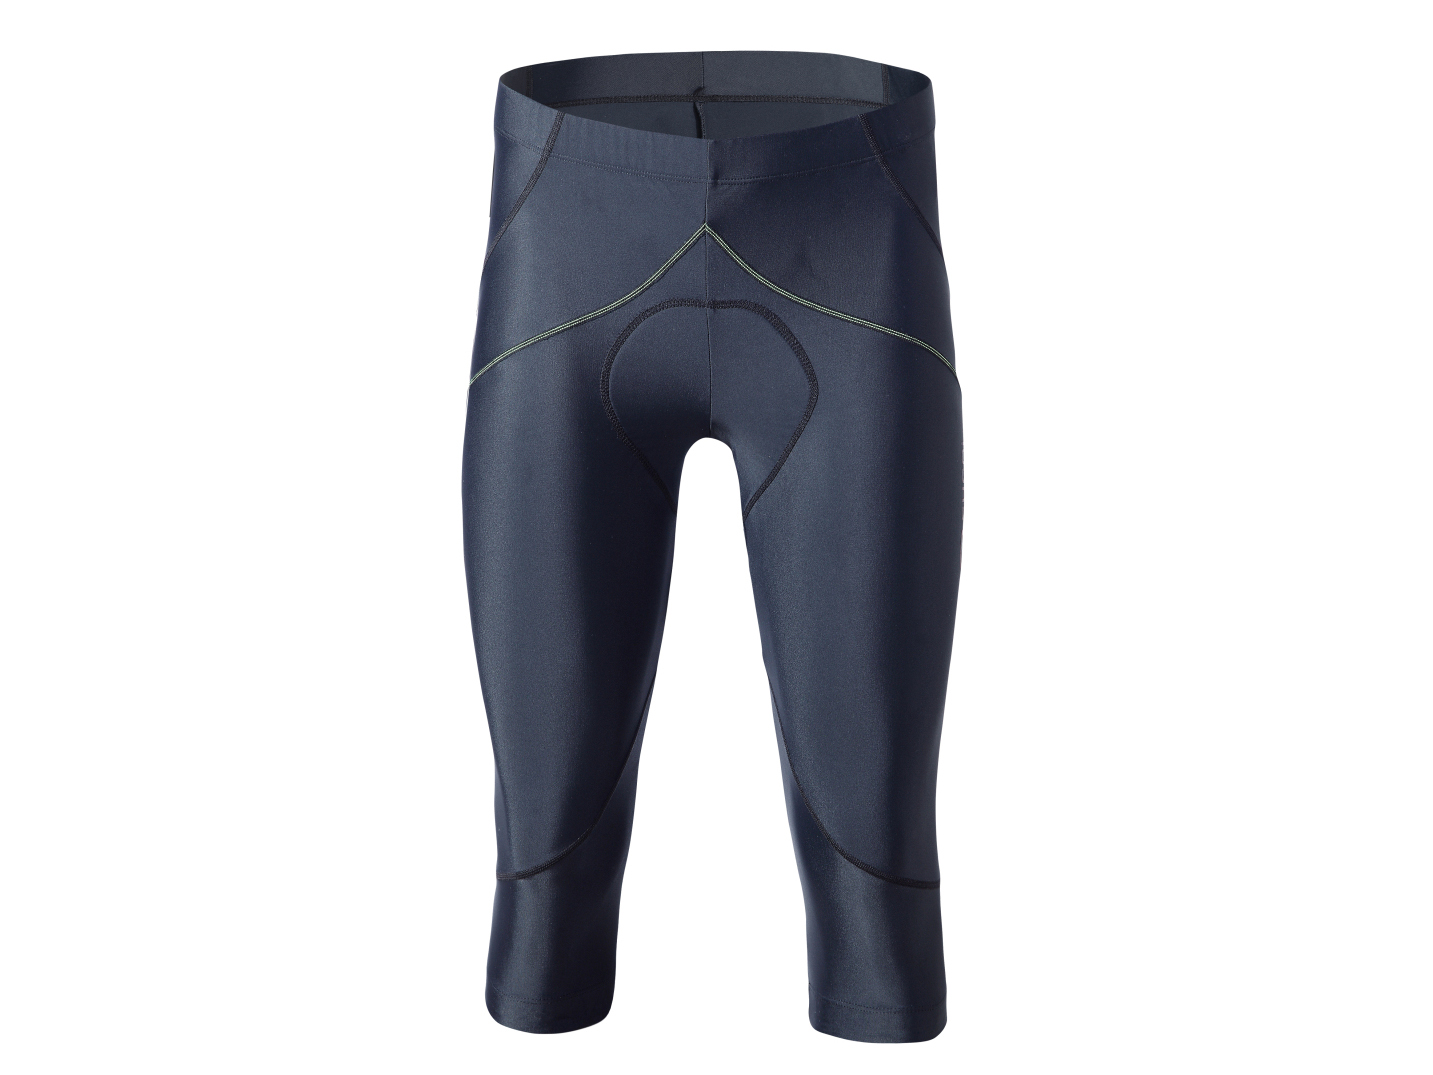 Men’s knitted bicycle 3/4 pant with pad